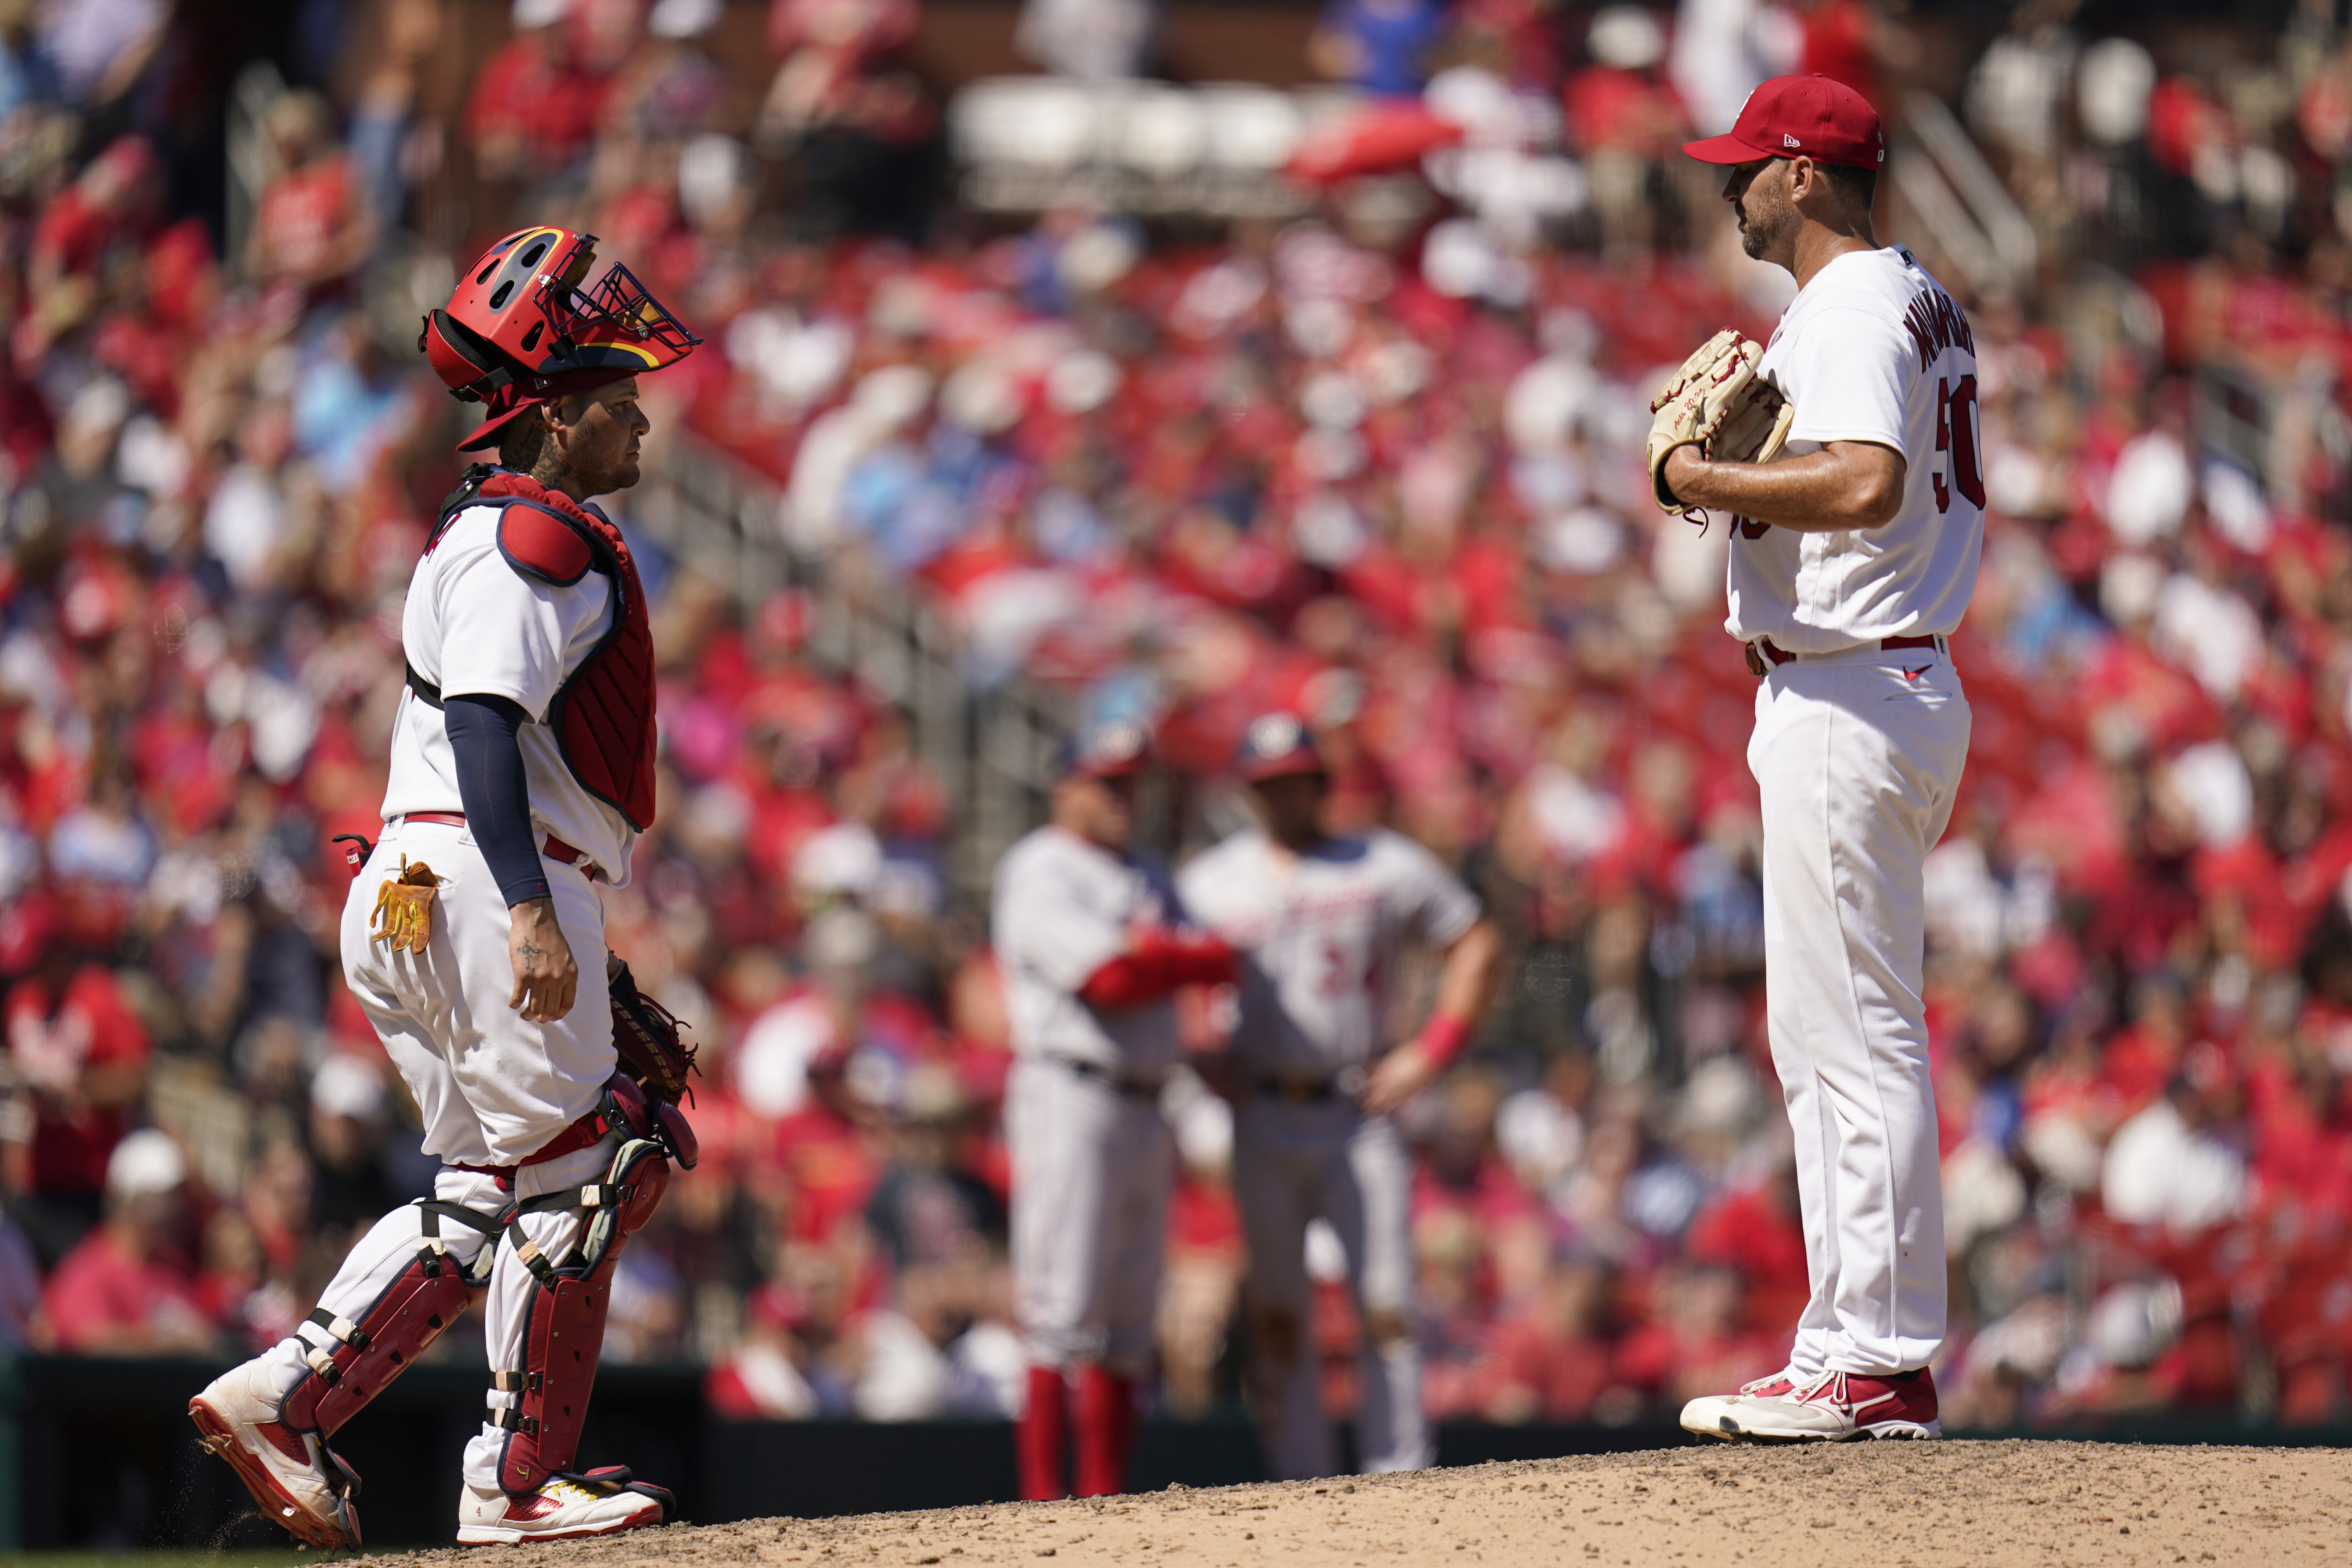 Adam Wainwright, Yadier Molina tie record for most starts by a battery